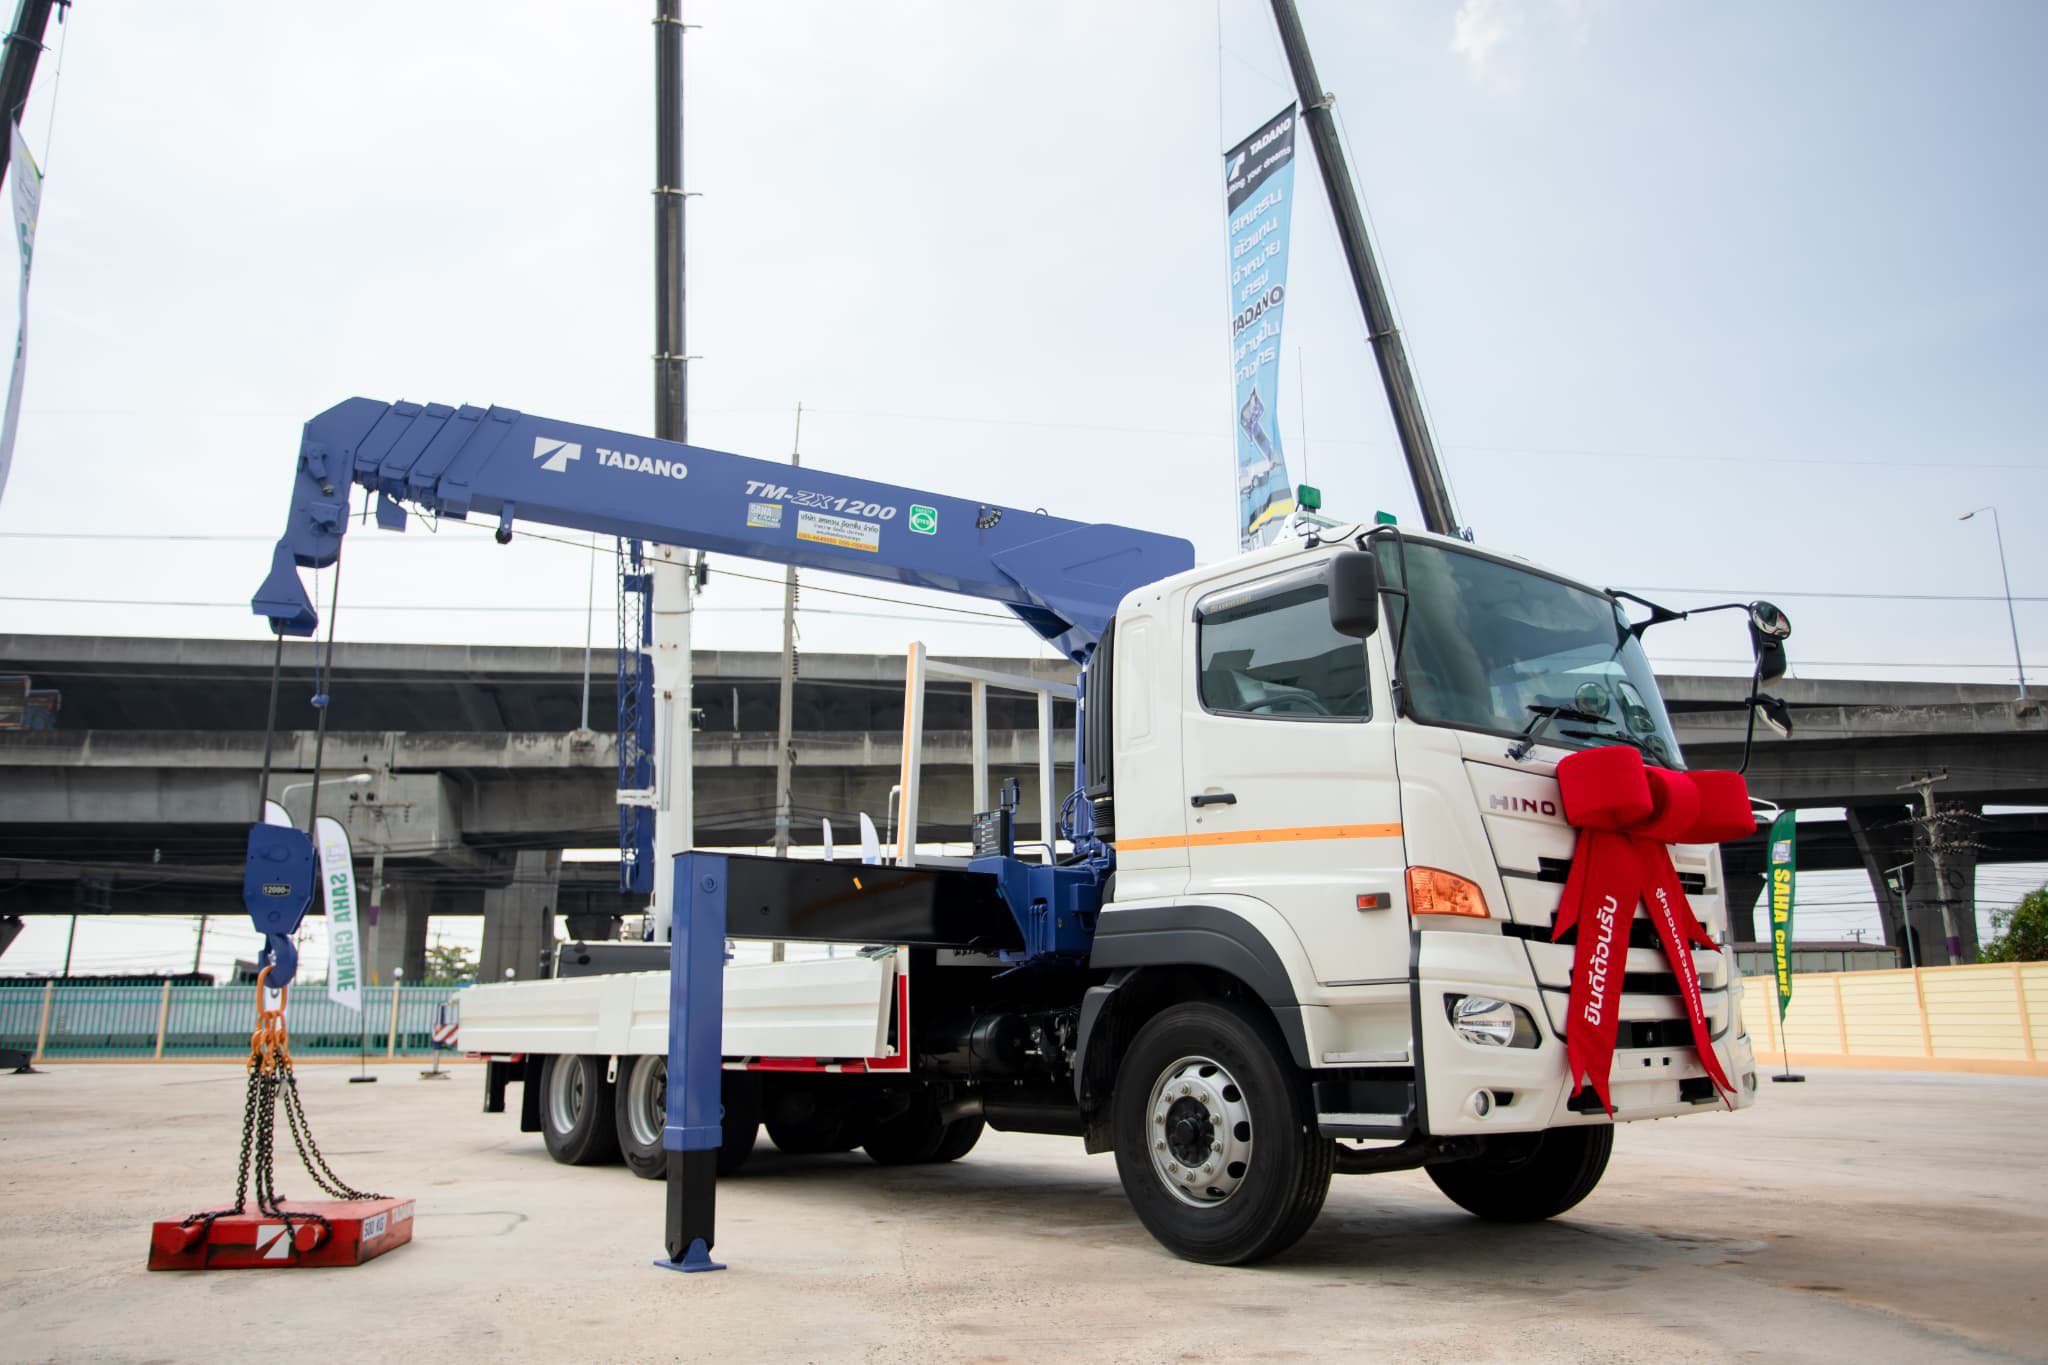 Tadano's TM-ZX1205HRS Truck Mounted Loader Crane during its November debut at Saha Crane Auction Co., Ltd. in Thailand.